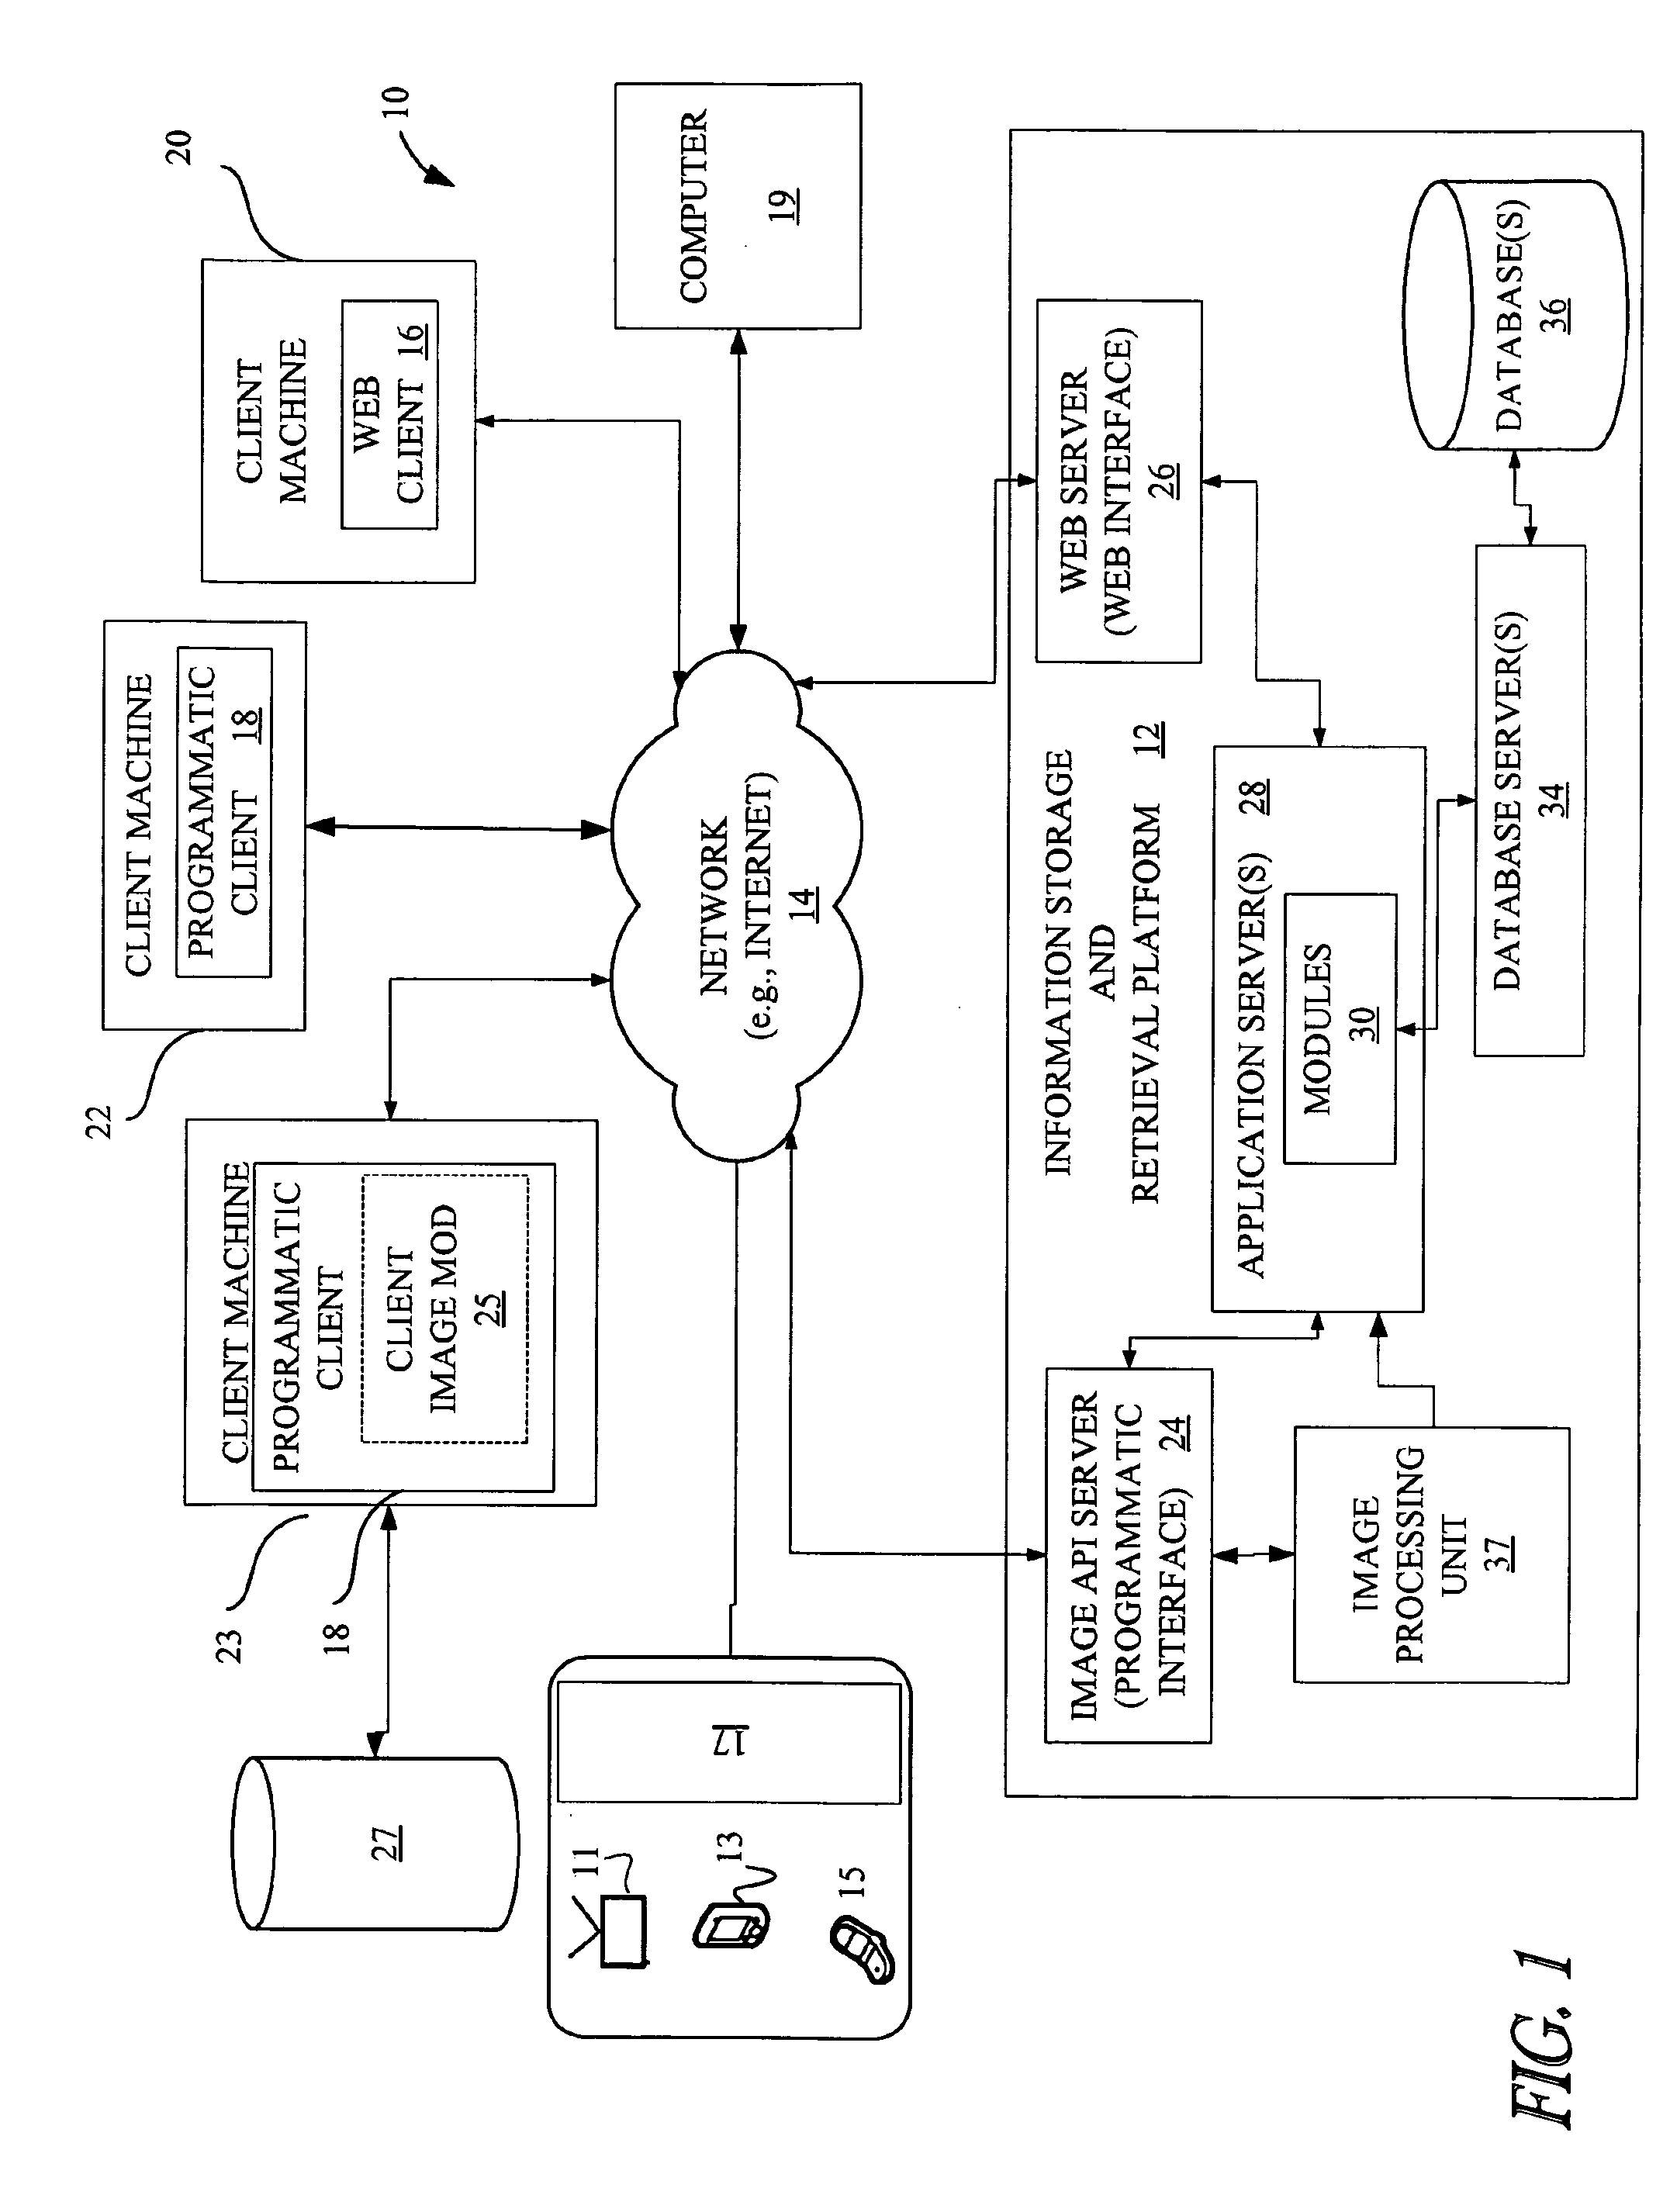 Method and apparatus for image recognition services